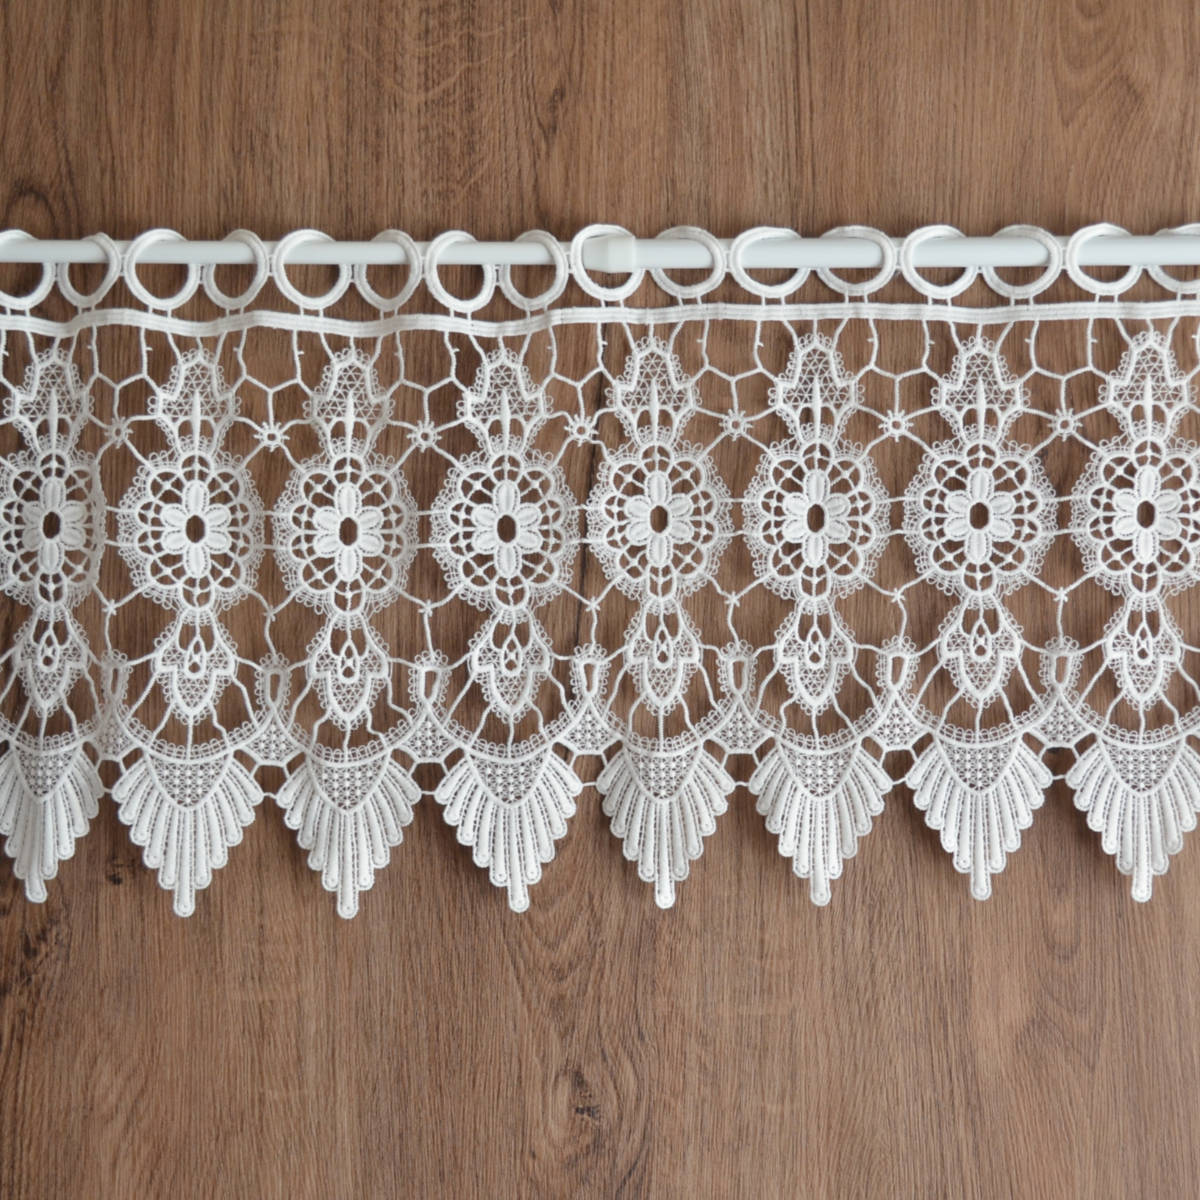 White Crochet Macrame Lace Kitchen Cafe Window Curtain Valance French Country